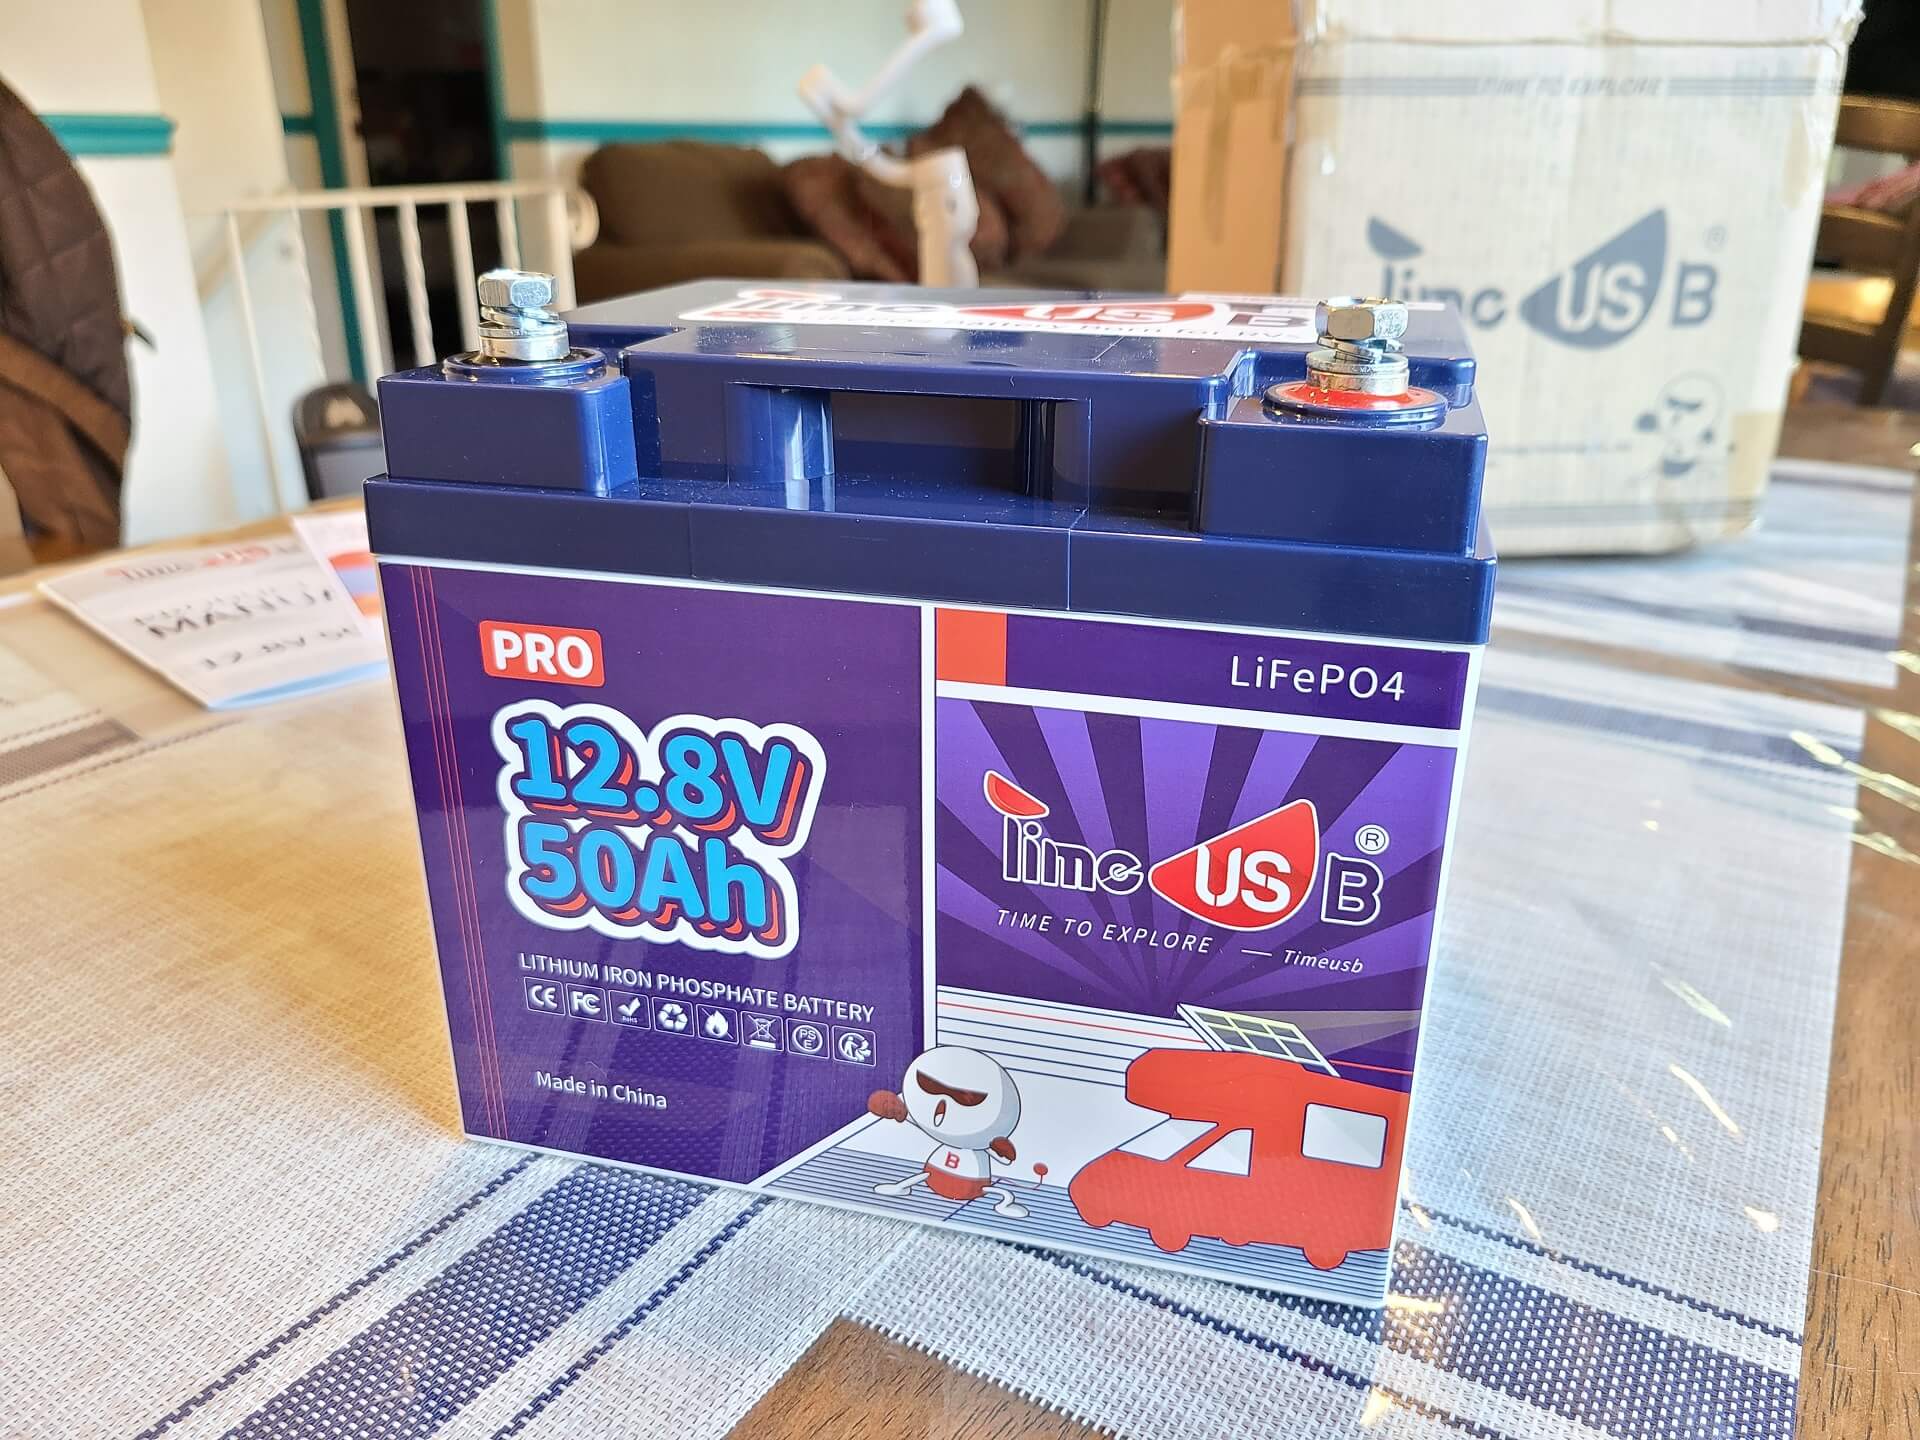 Review: Timeusb 12V 50Ah LiFePO4 Battery